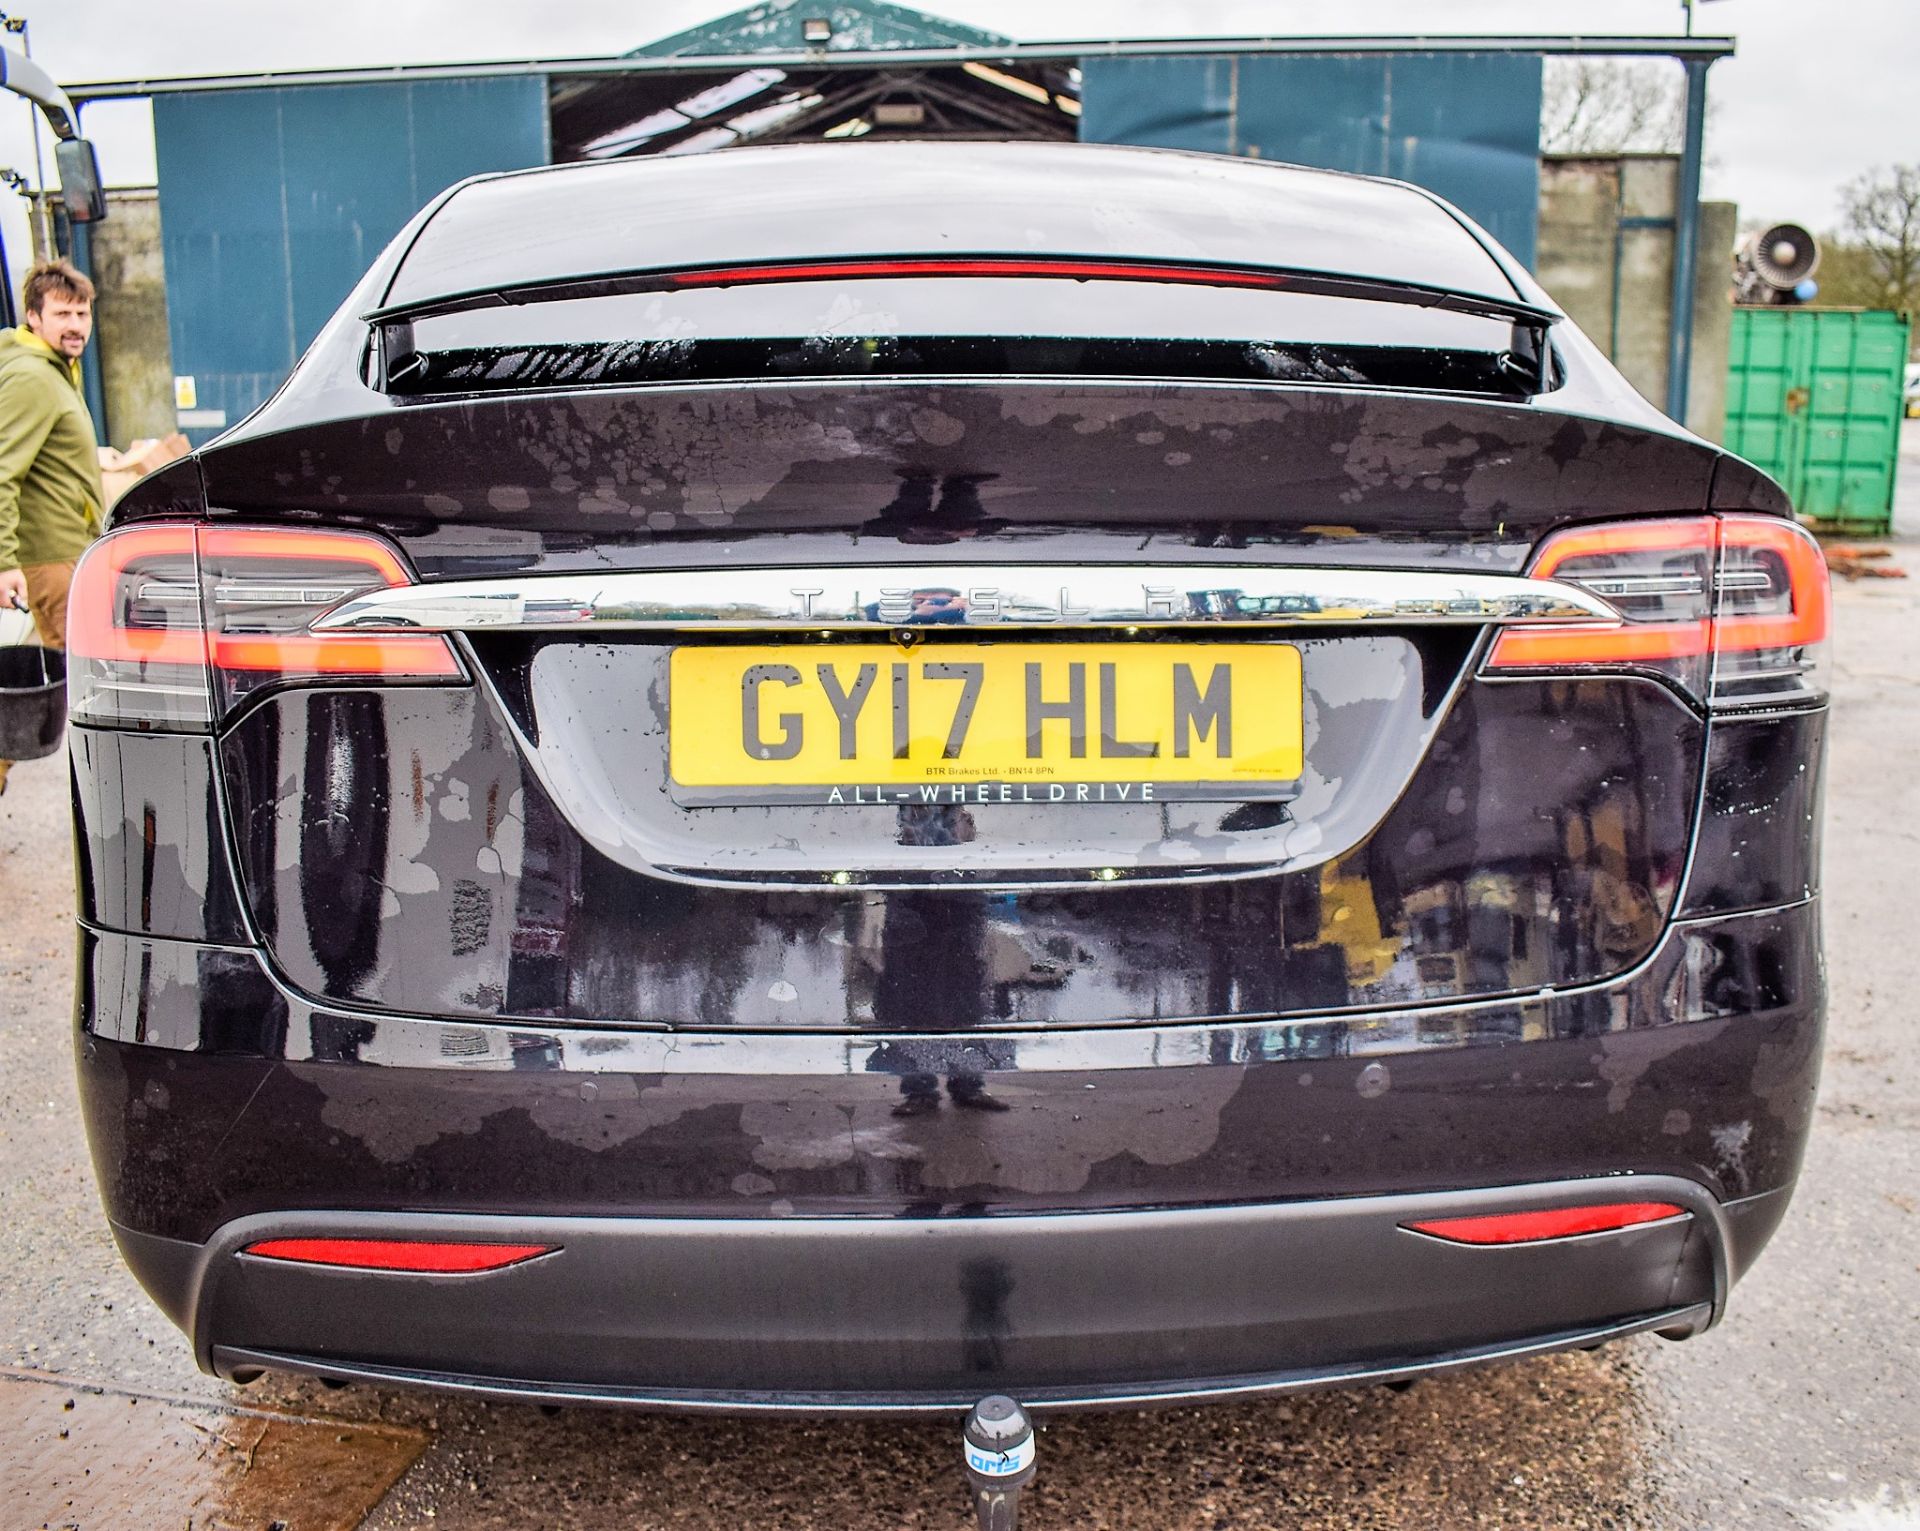 Tesla Model X 90 D dual motor 7 seat battery electric SUV Registration Number: GY17 HLM Date of - Image 6 of 14